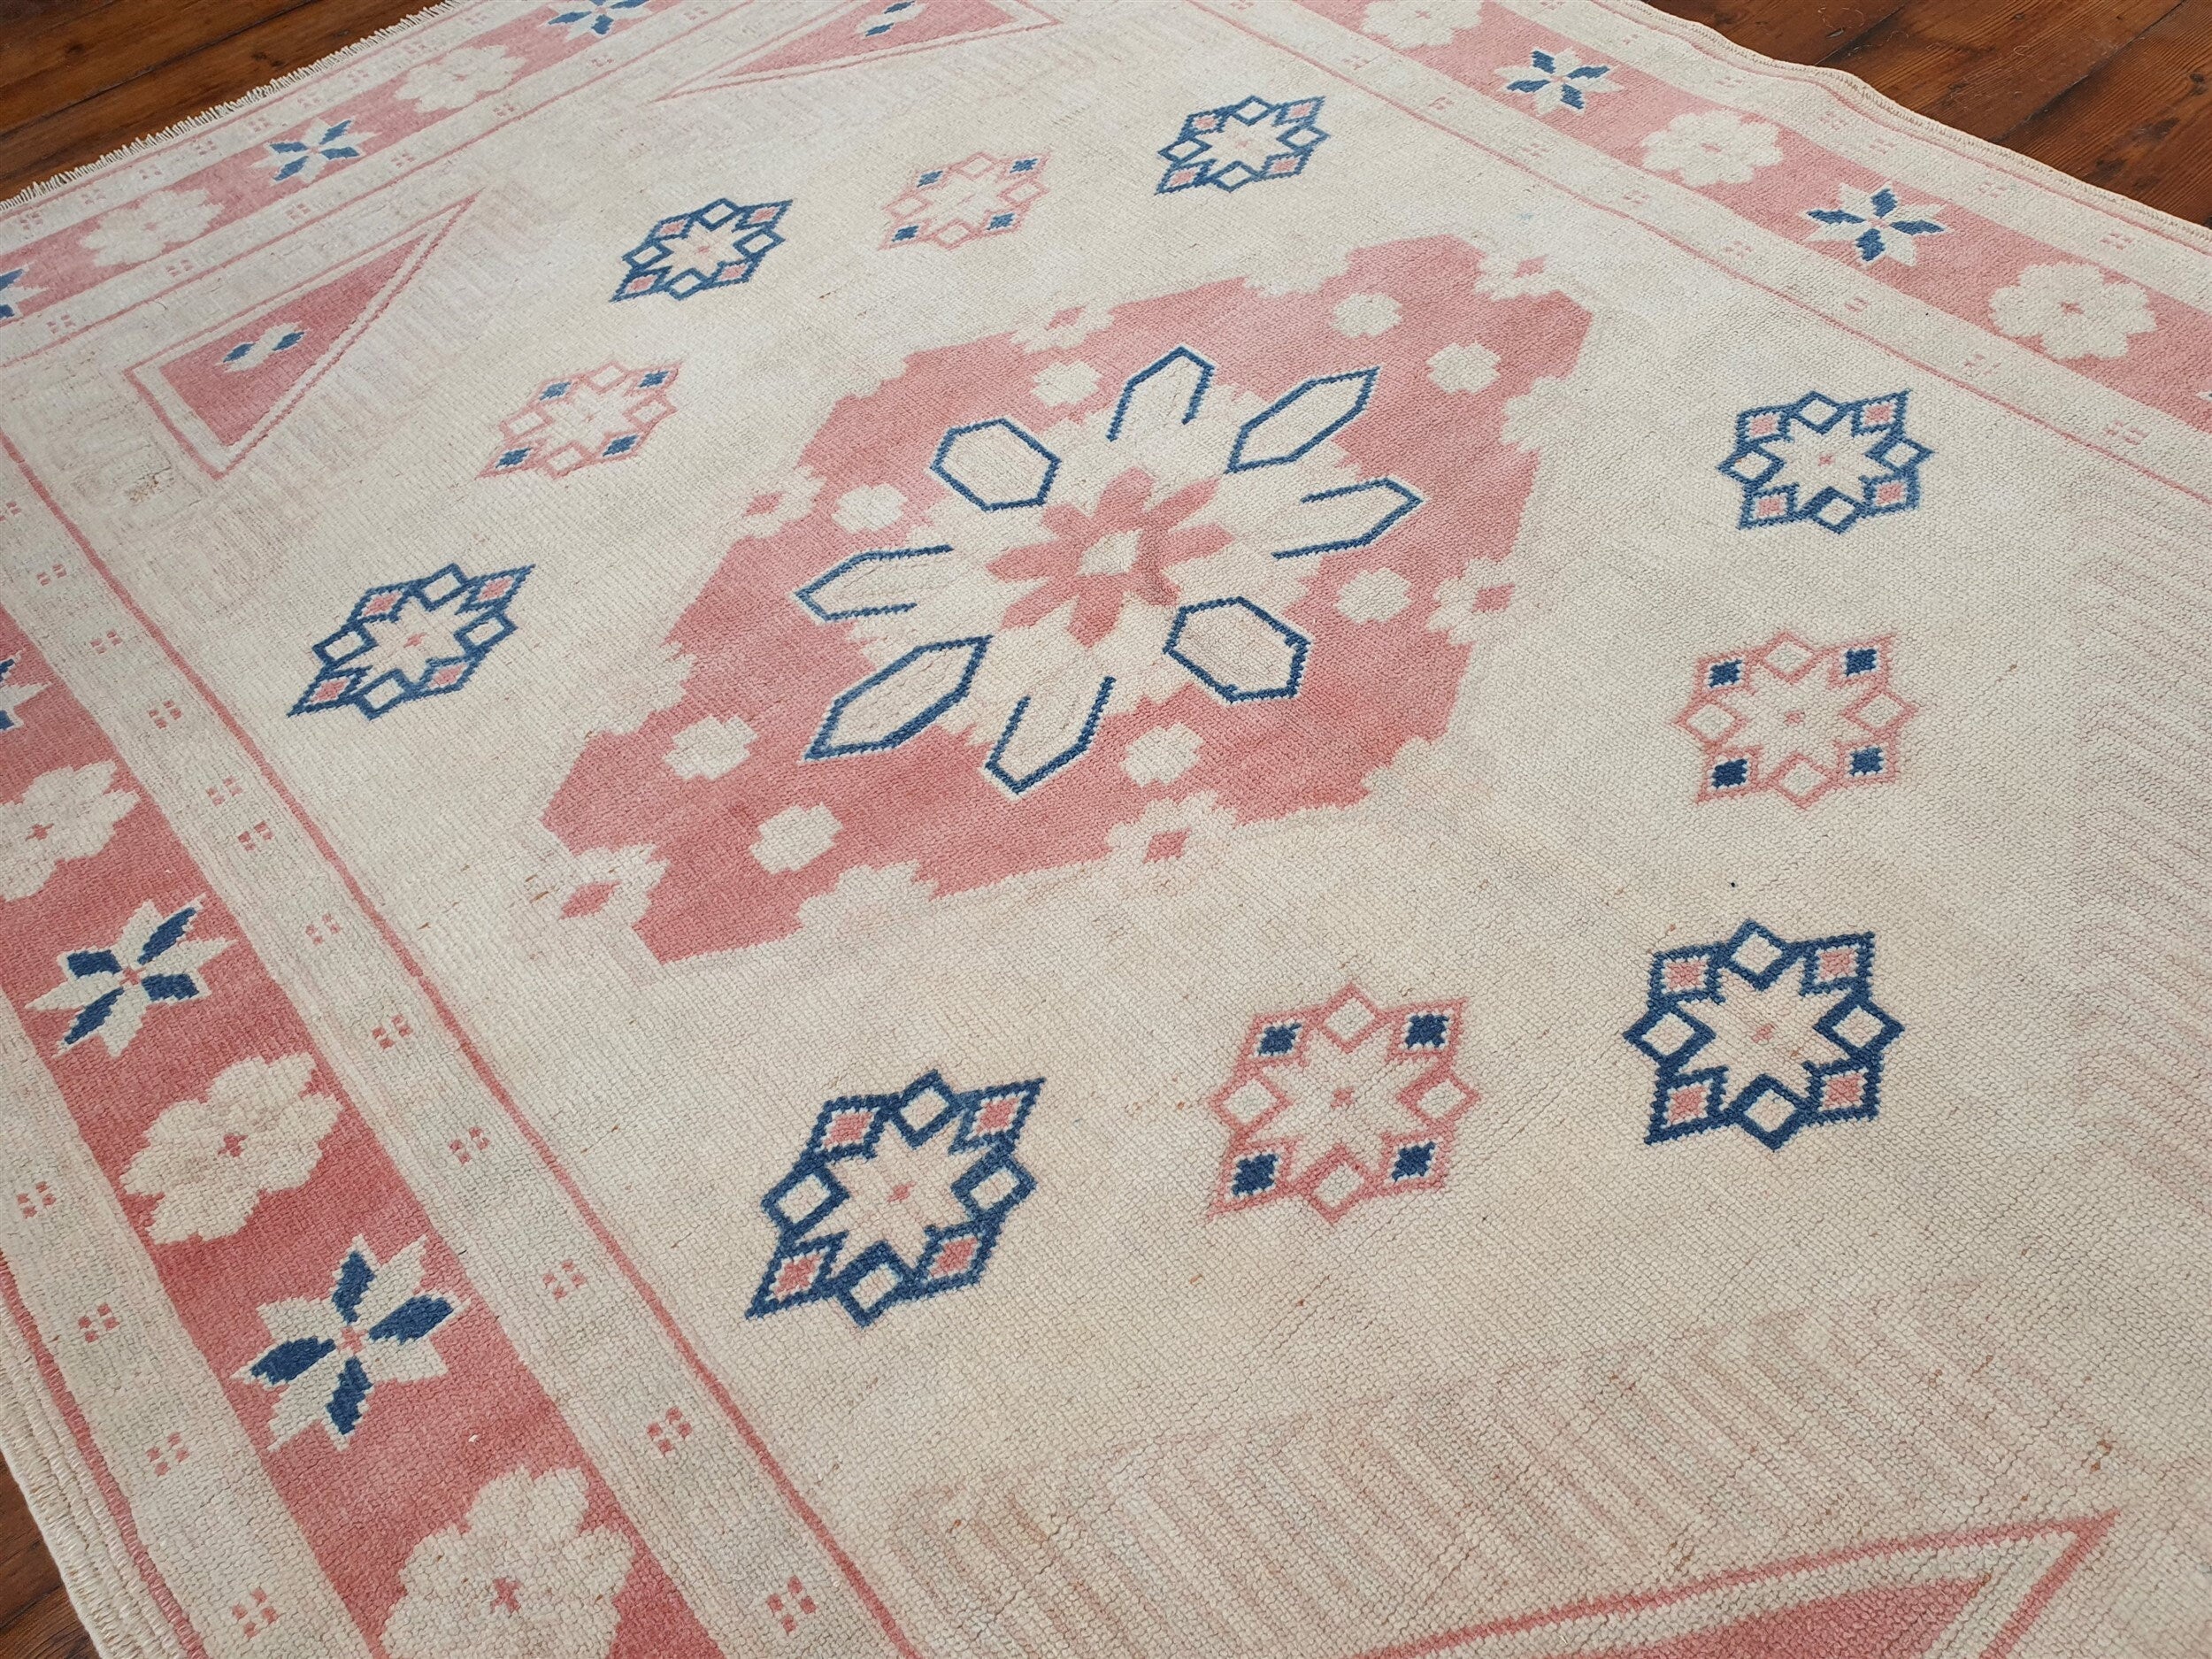 Pink Turkish Vintage Oushak Rug, 5 x 4 ft Overdyed Distressed Handmade Carpet, Boho Rustic Decor Persian Area Rug for Lounge Hall or Entry